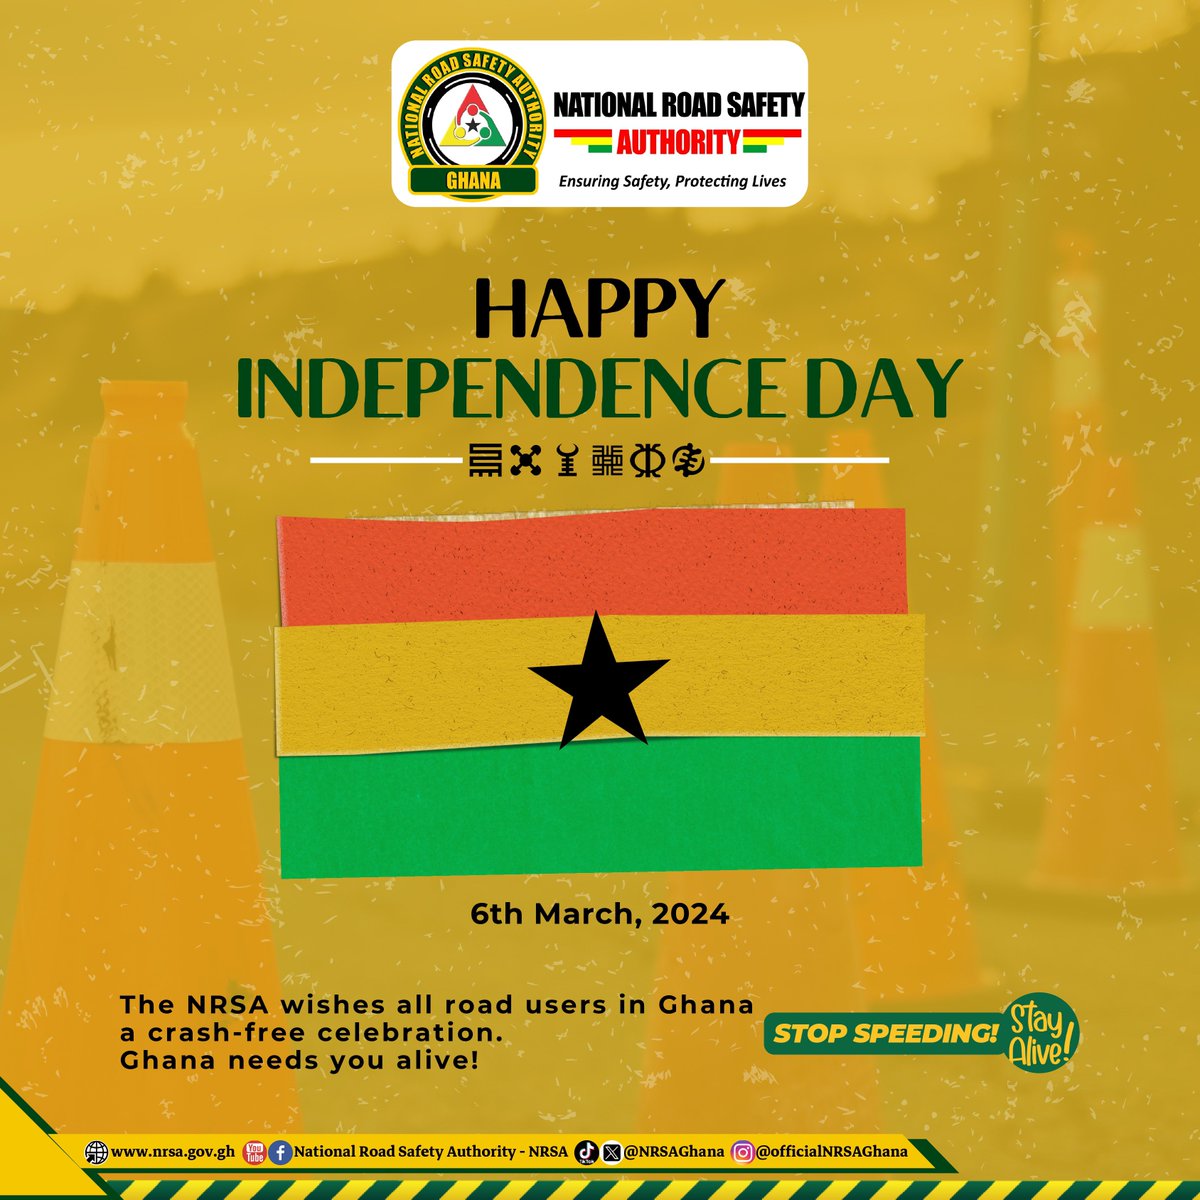 Happy 67th Independence Anniversary #IndependenceDay #Ghana@67 #RoadSafety #EnsuringSafetyProtectingLives #StayAlive